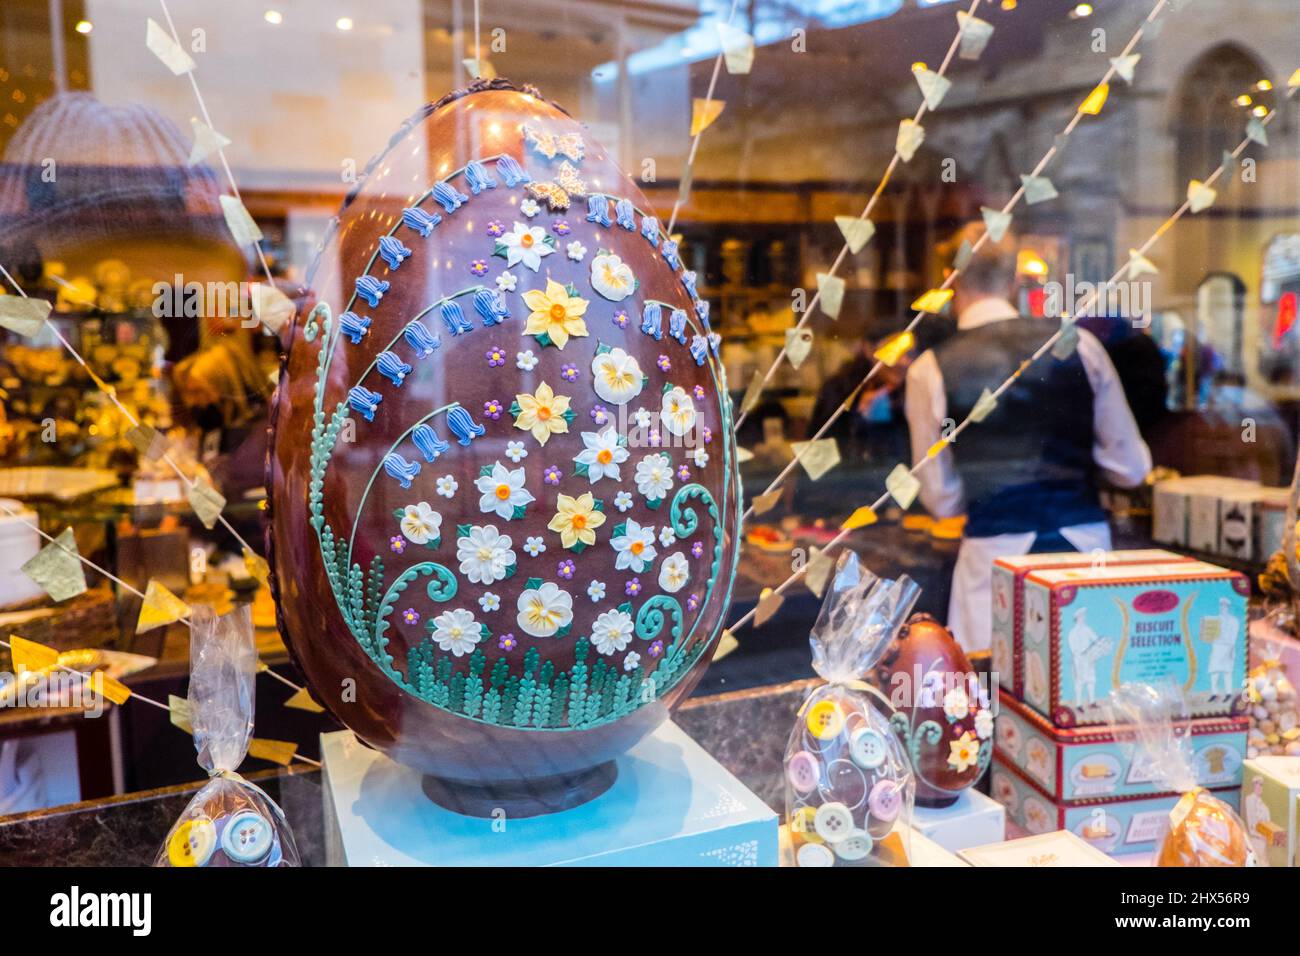 Huge,big,large,extravagant,Easter,Easter egg,shop,display,window,window display,at,inside,famous,institution,Bettys Cafe Tea Rooms,York,city,centre,Yorkshire,England,English,UK,United Kingdom,GB,Great Brtiain,British,Europe, Stock Photo